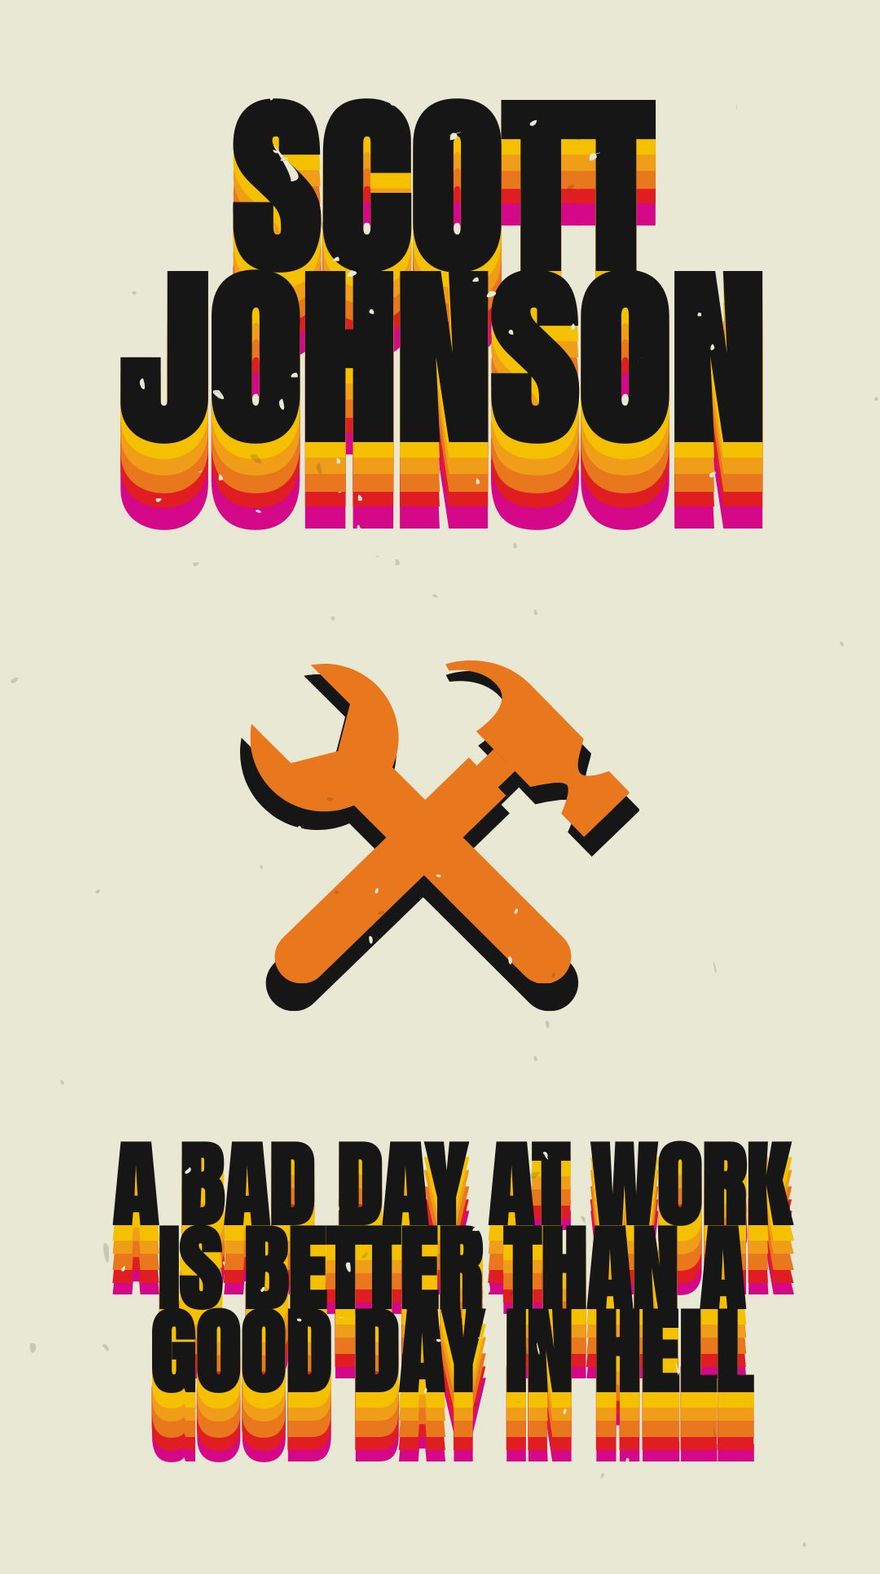 Free Scott Johnson - A bad day at work is better than a good day in hell. in JPG